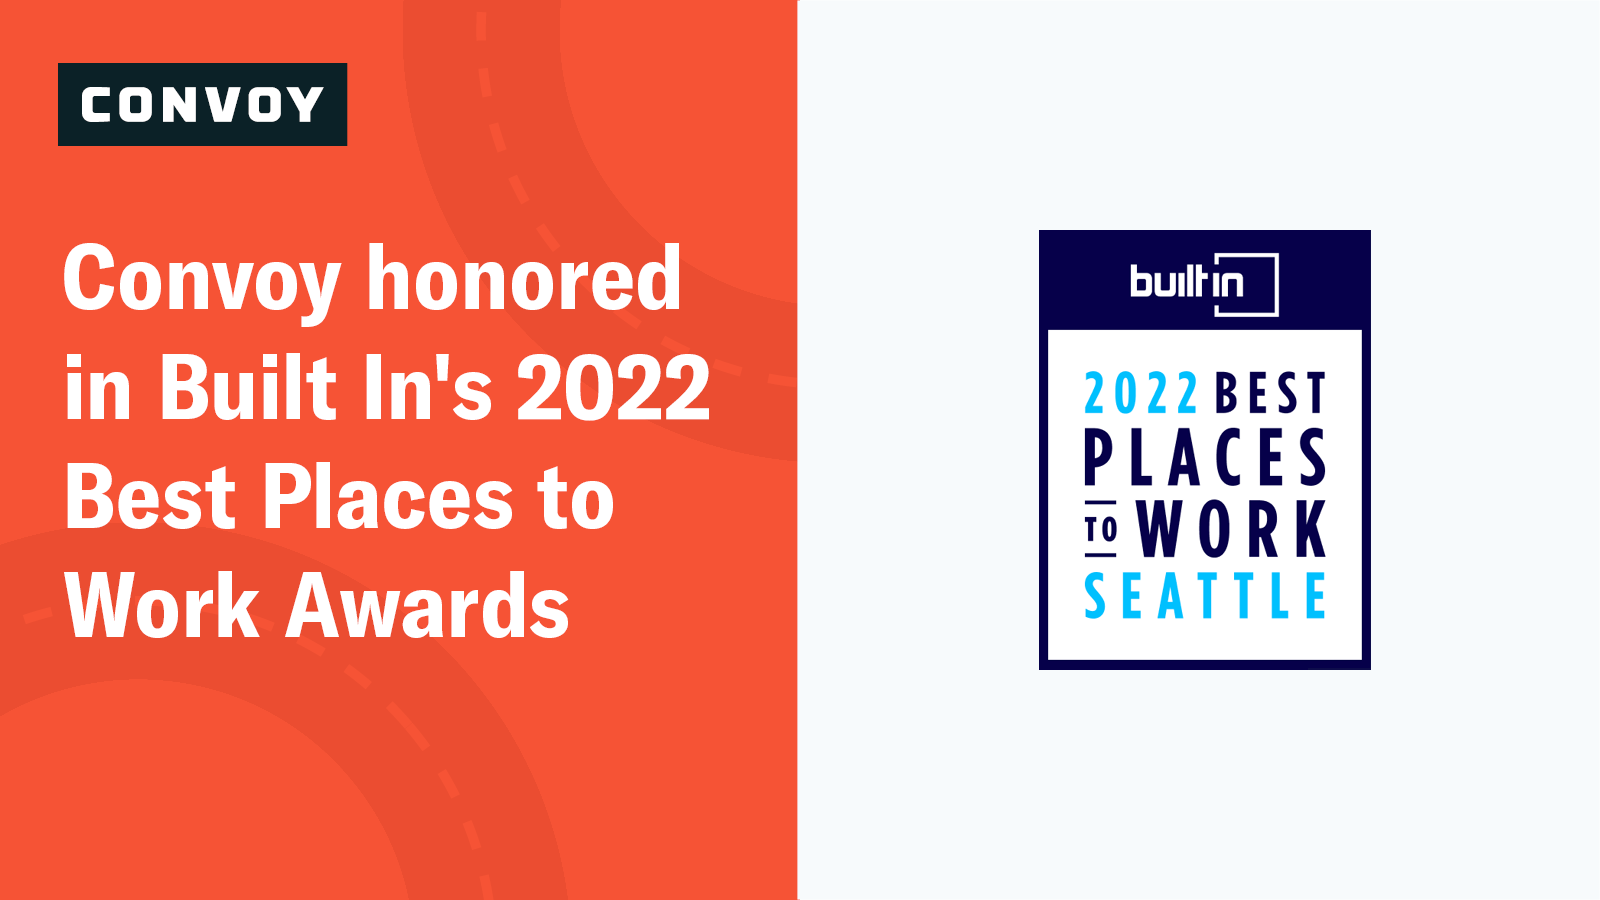 Built In Names Convoy in 2022 Best Places to Work Awards